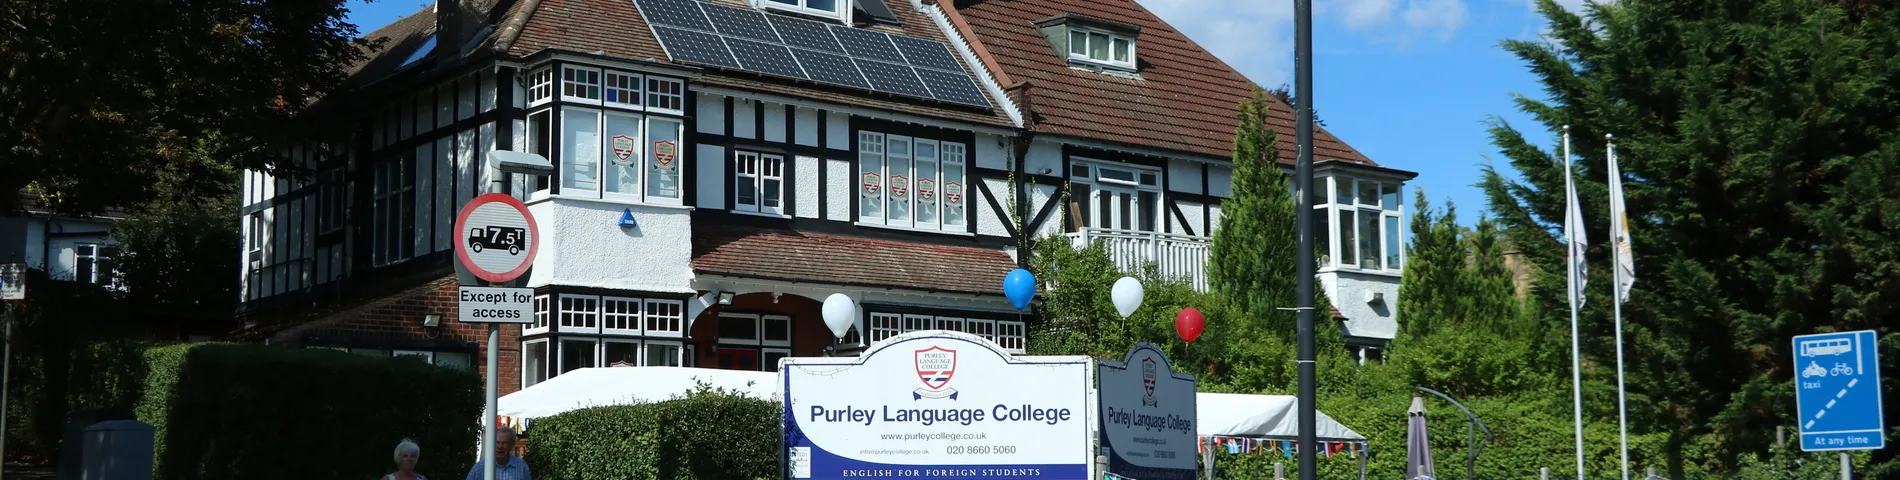 Purley Language College picture 1